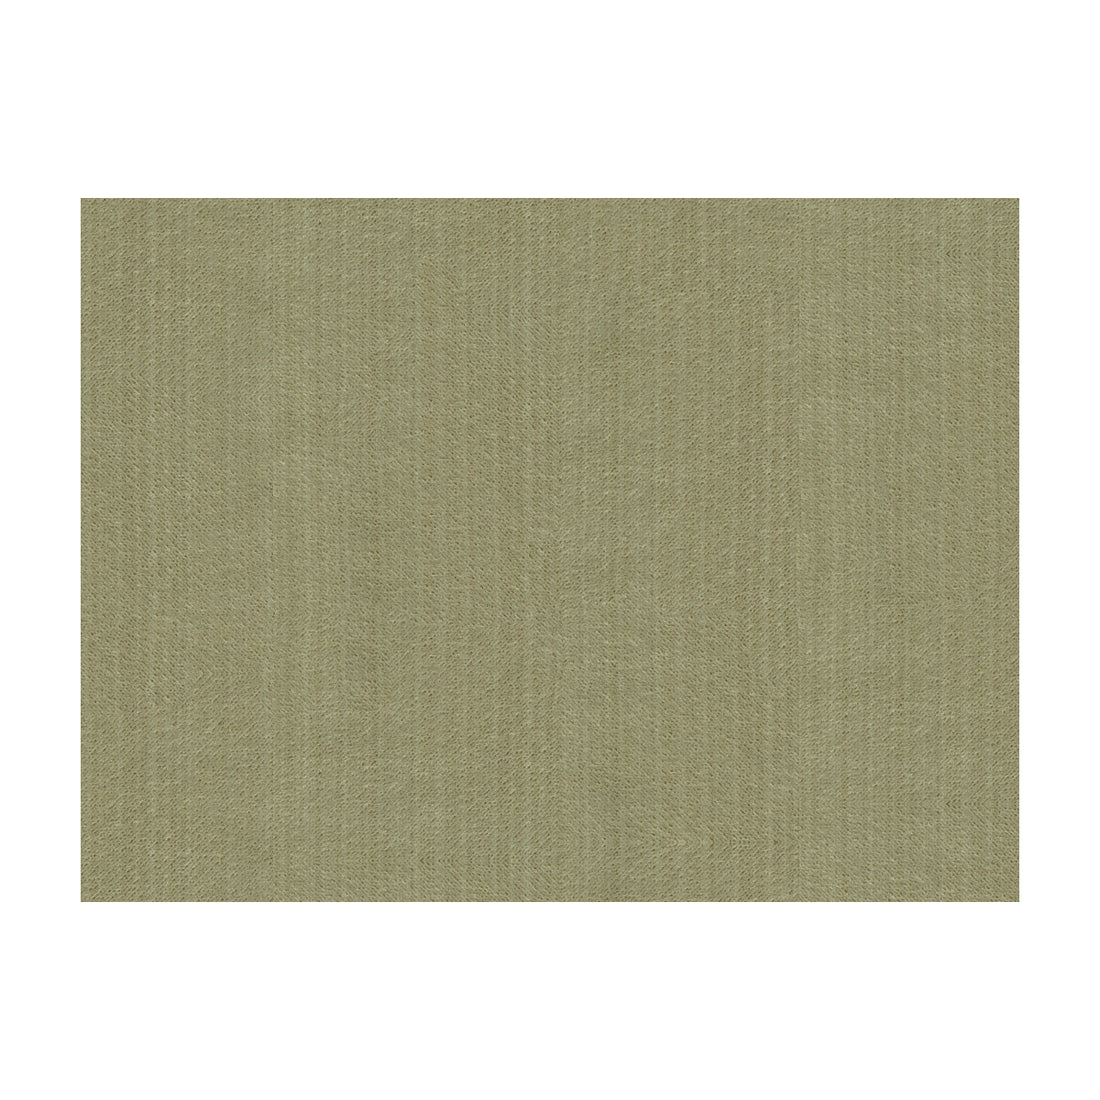 Kravet Contract fabric in 33353-521 color - pattern 33353.521.0 - by Kravet Contract in the Gis collection